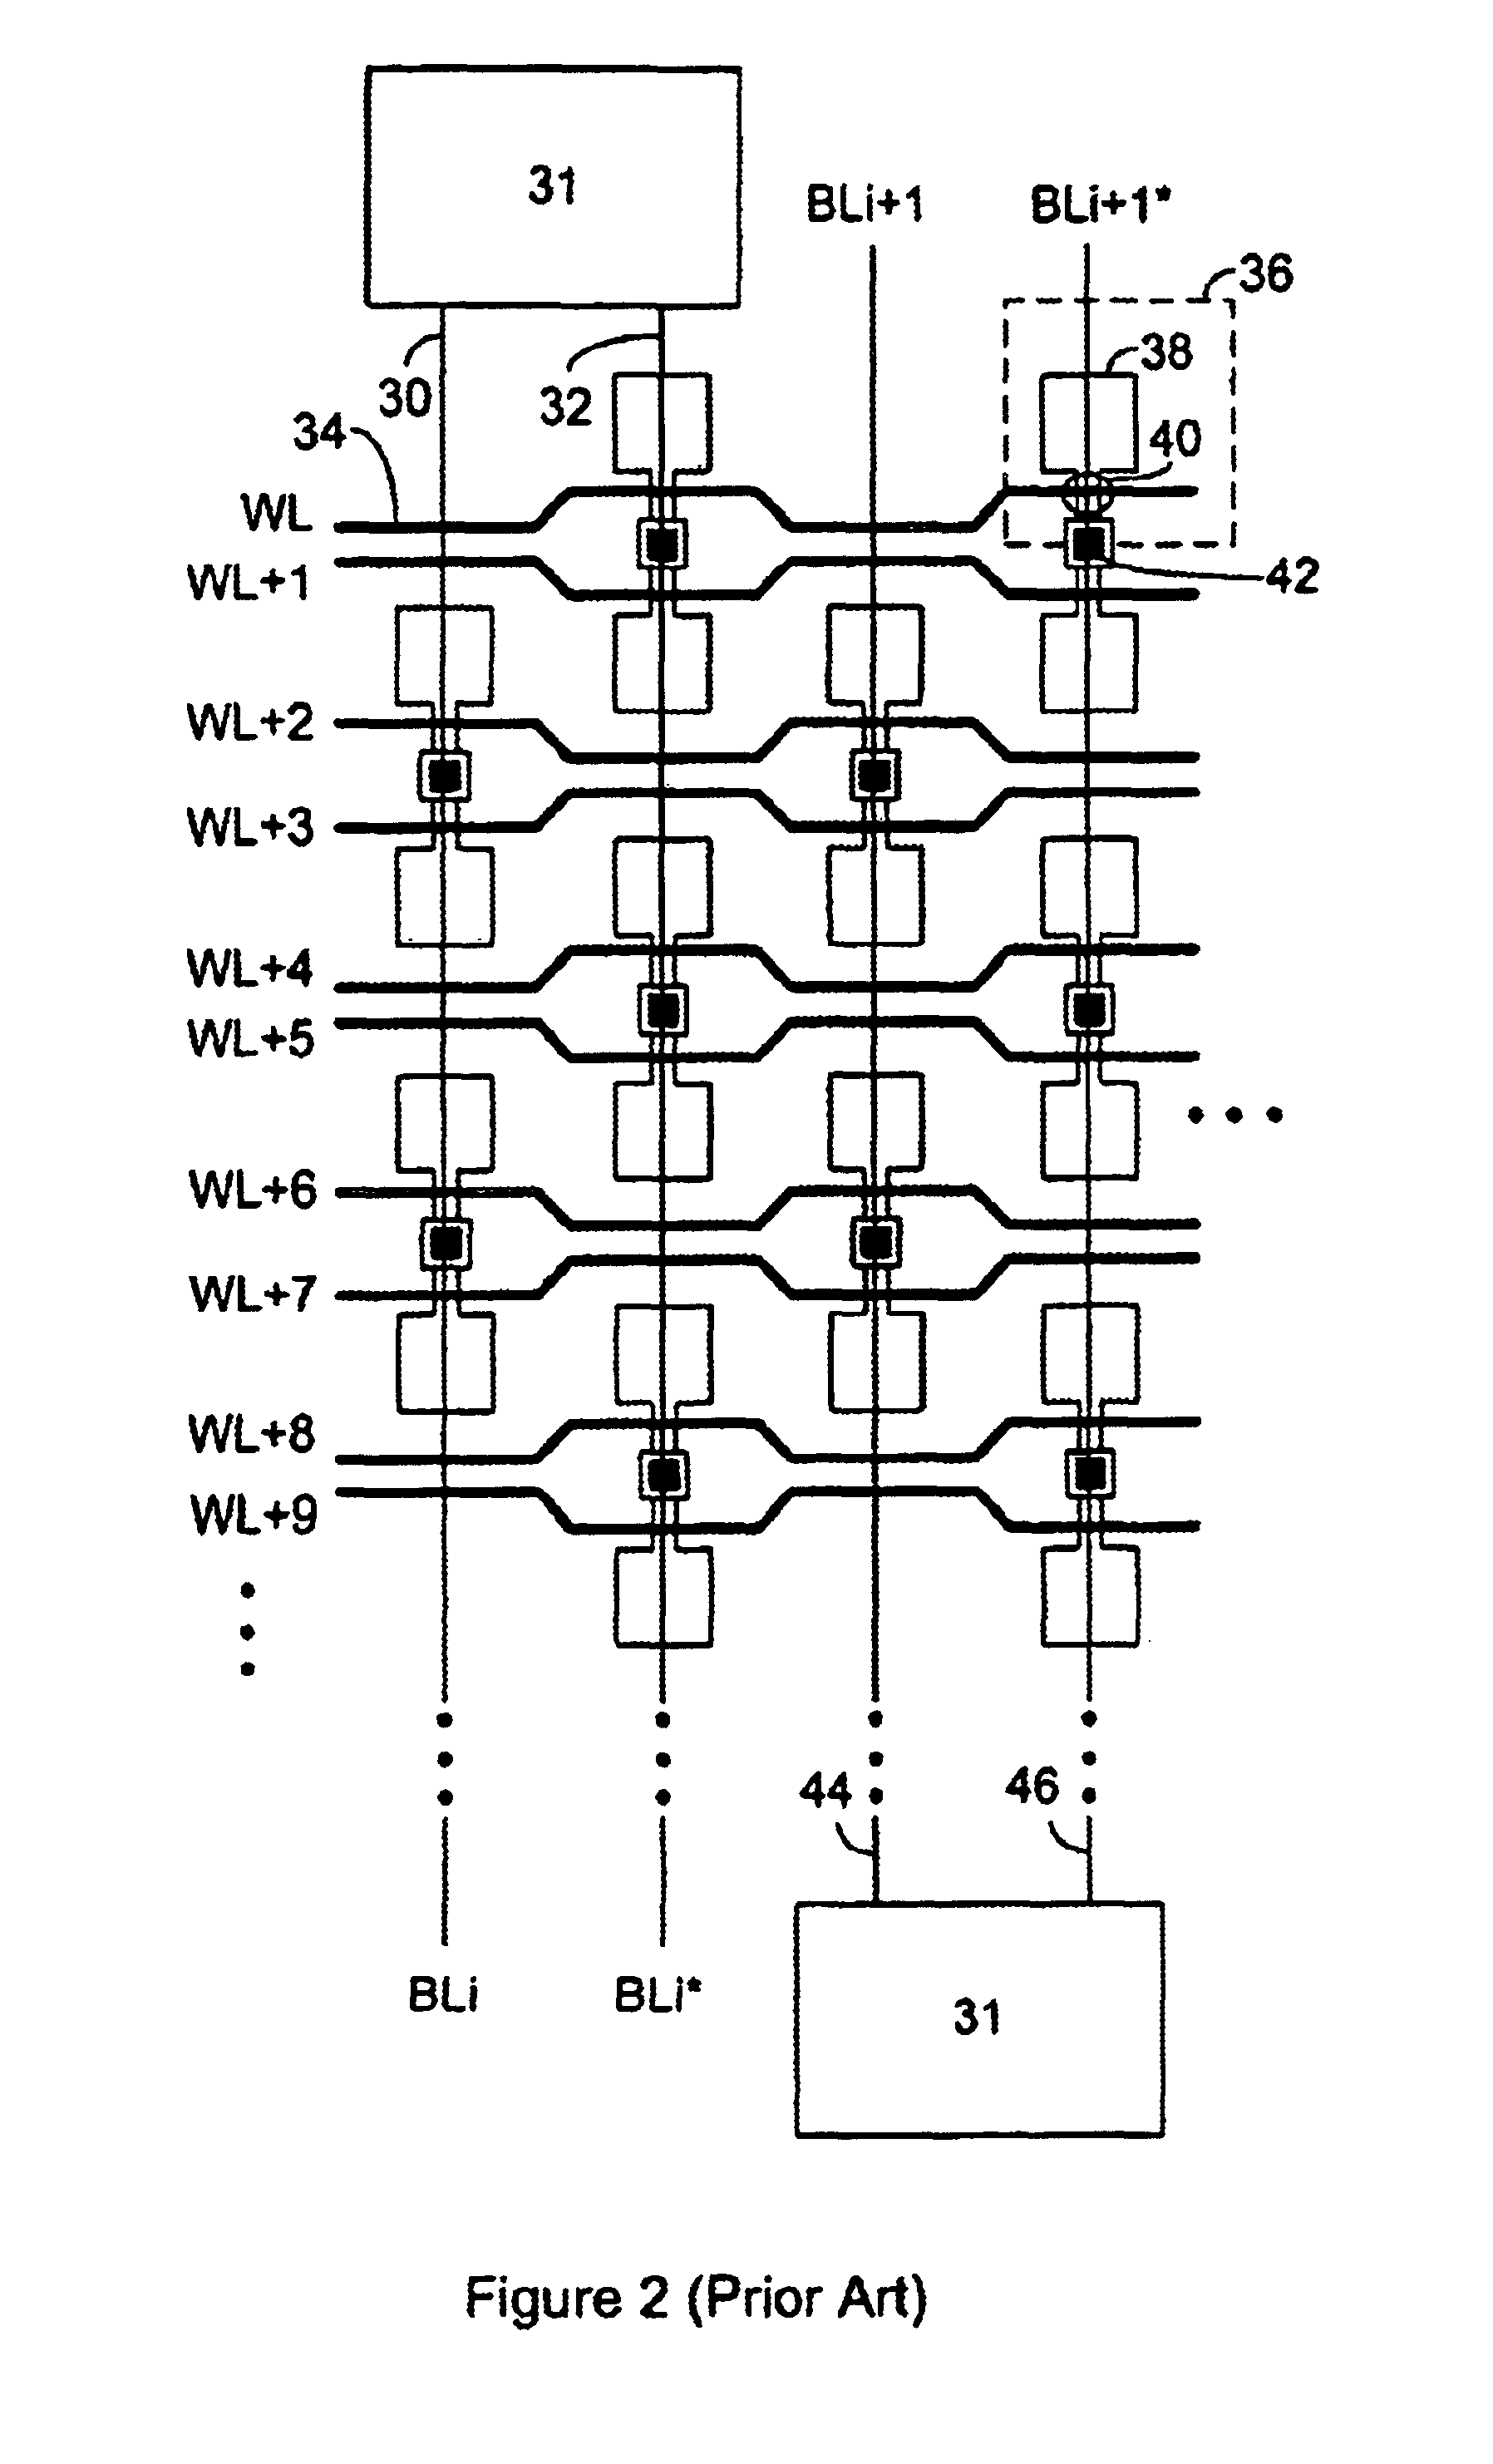 RAM having dynamically switchable access modes